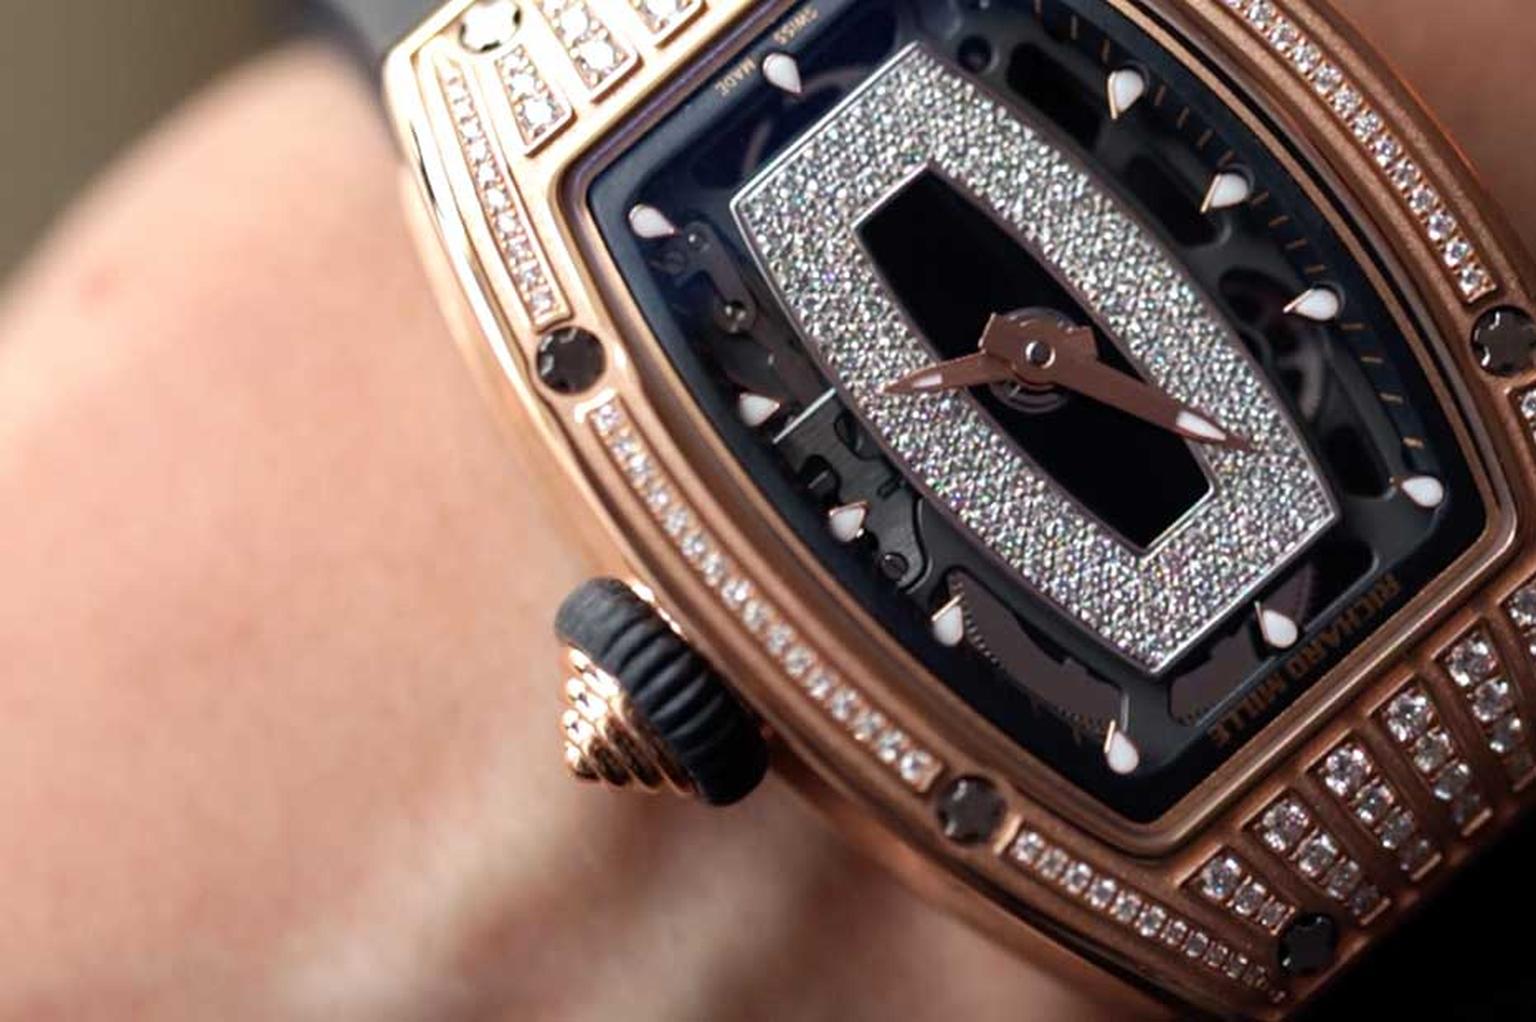 Richard Mille watches decided to sponsor the maiden edition of Chantilly Arts & Elegance as the brand is close to the world of cars and, of course, elegance and glamour.